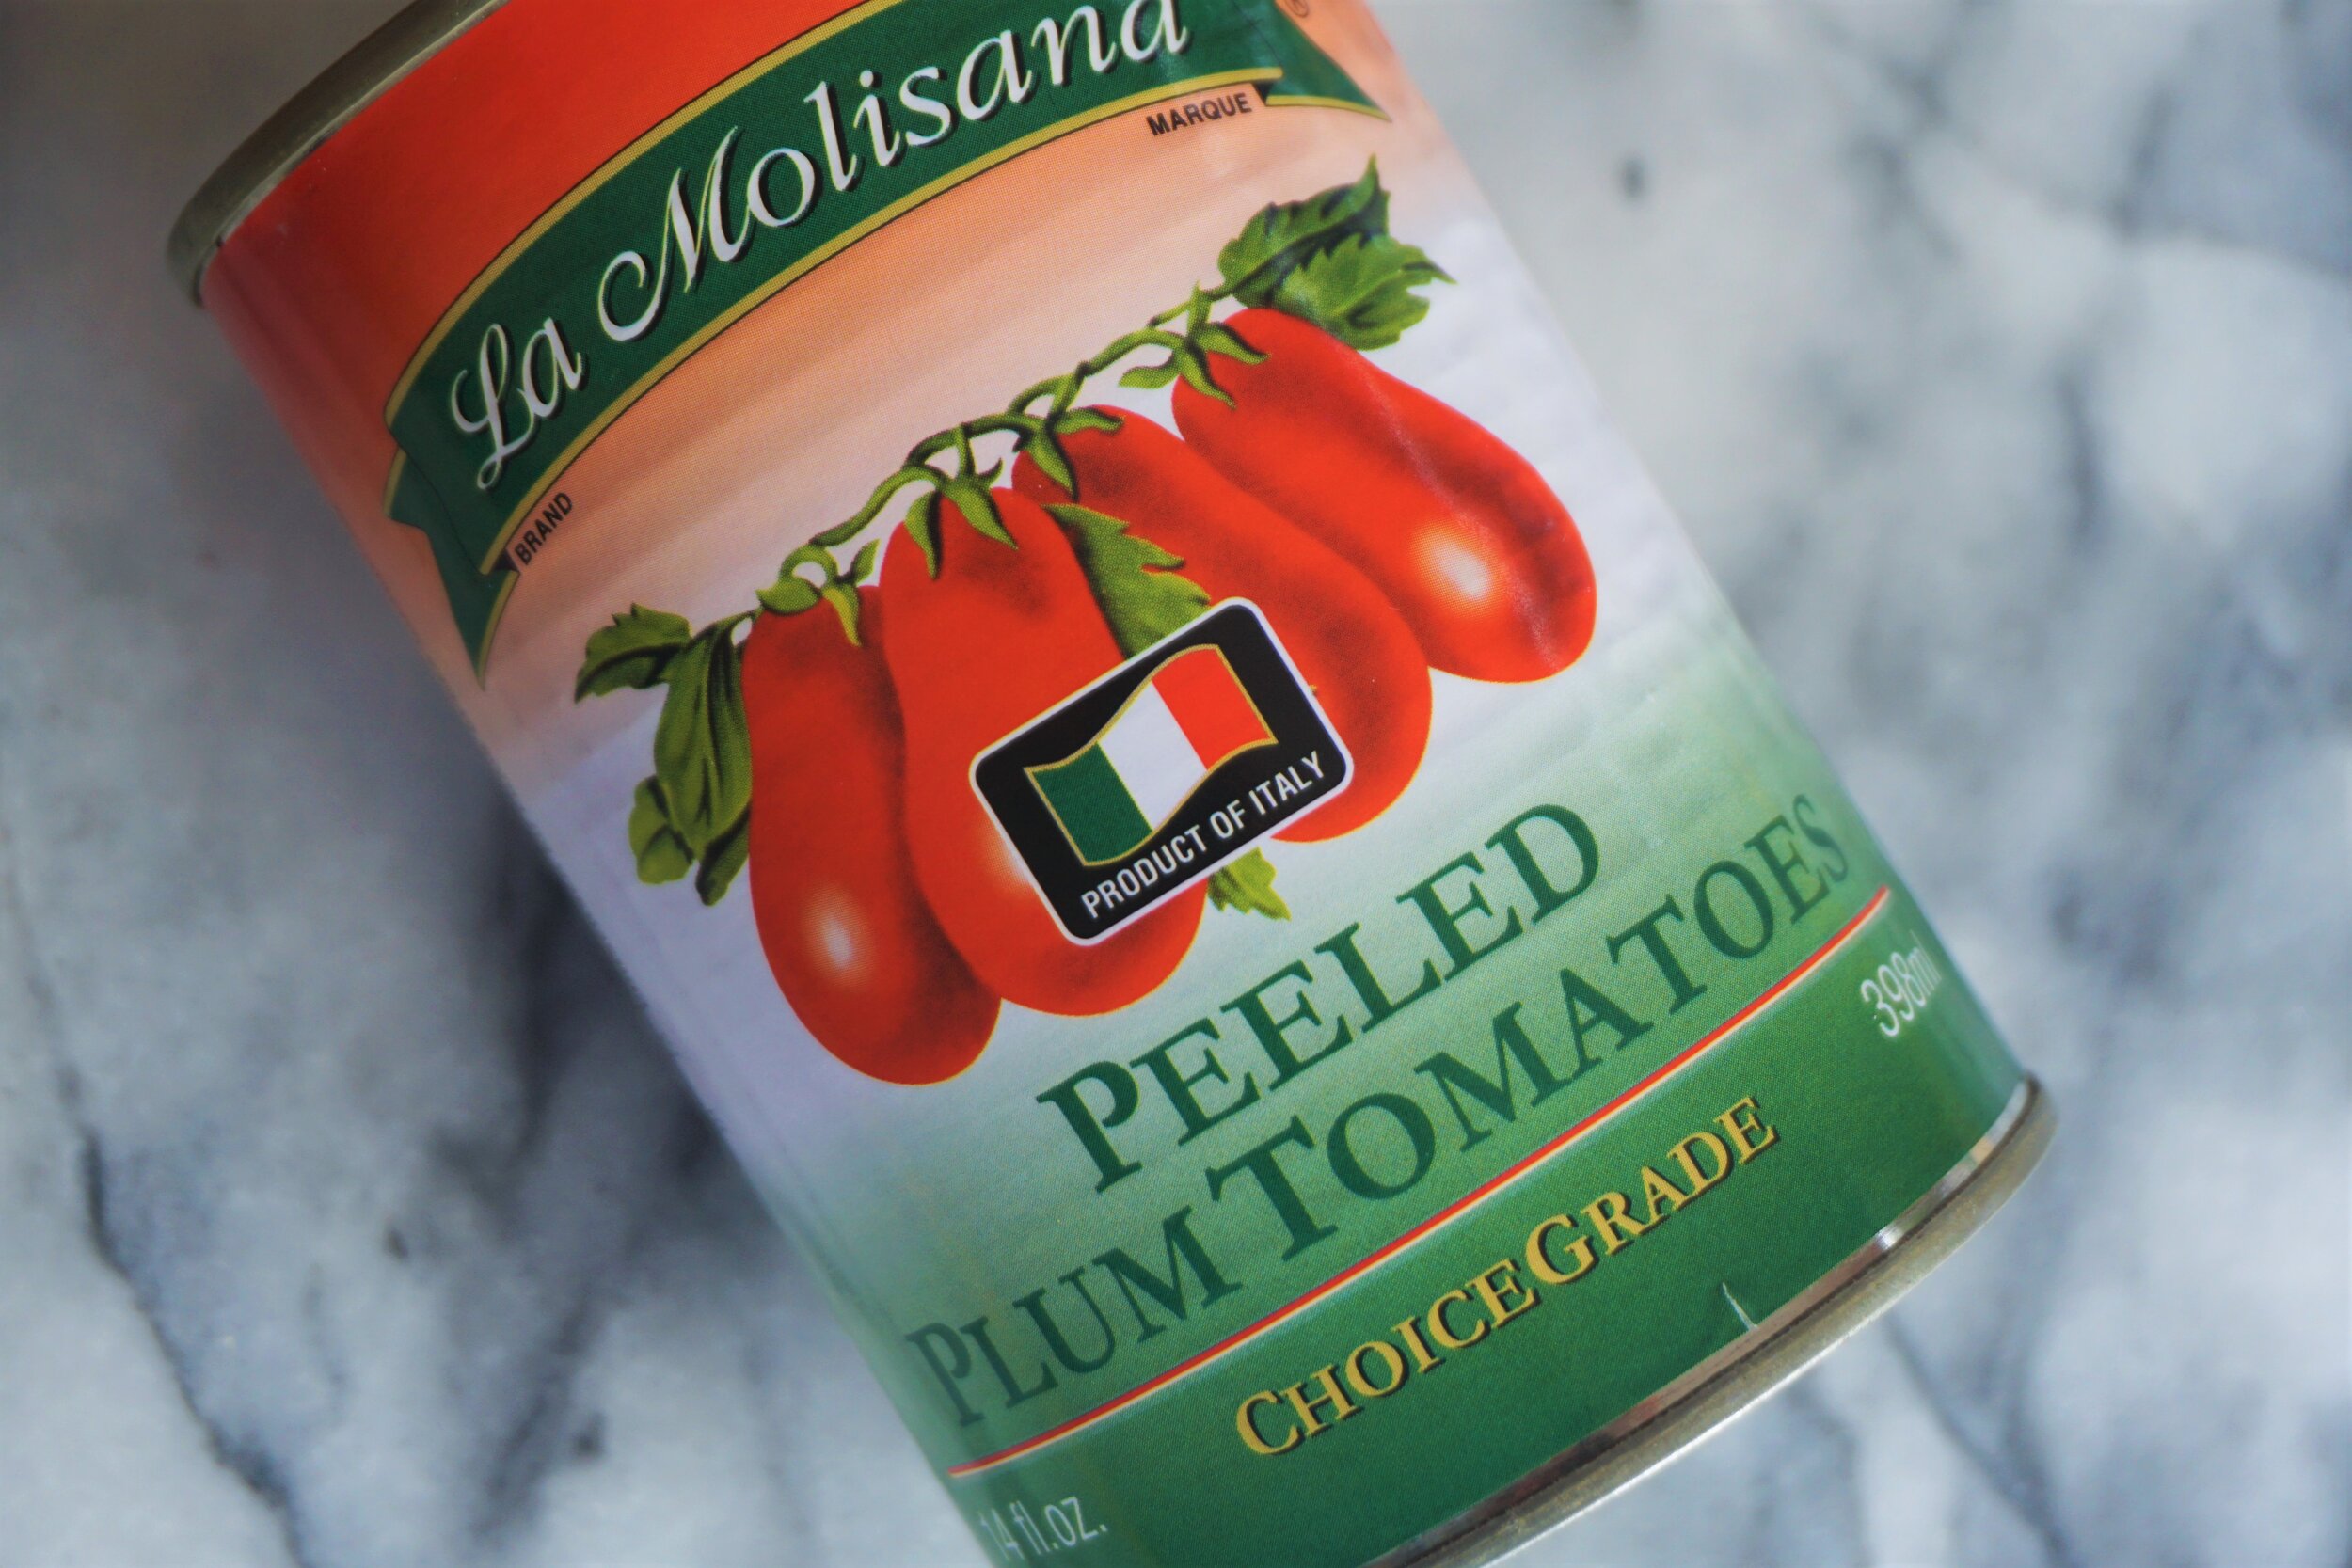 Whole Plum Tomatoes or San Marzano Tomatoes are a great base for the sauce.